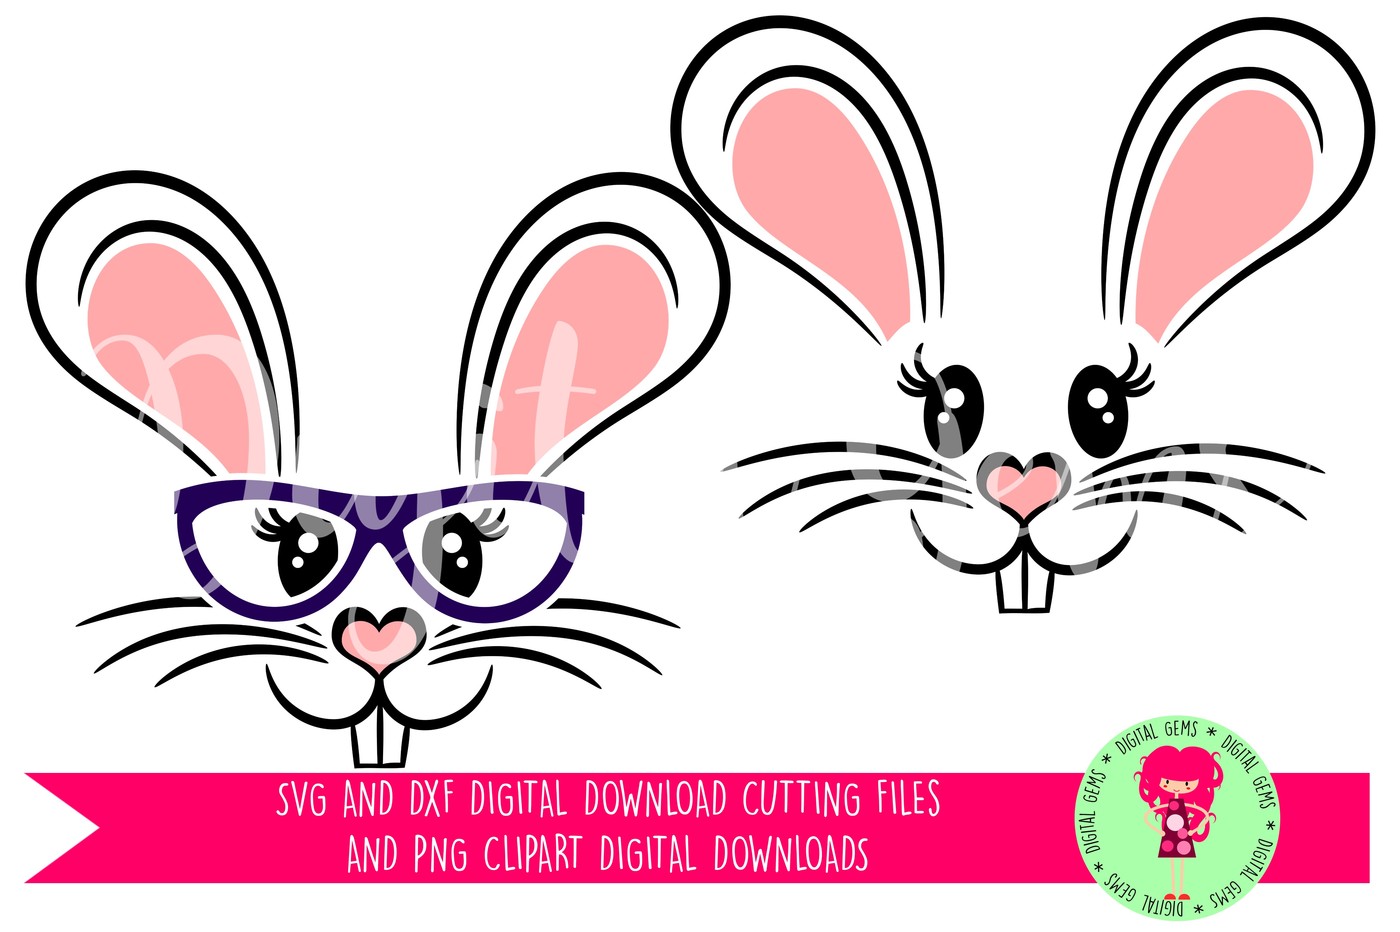 Whiskers svg #5, Download drawings